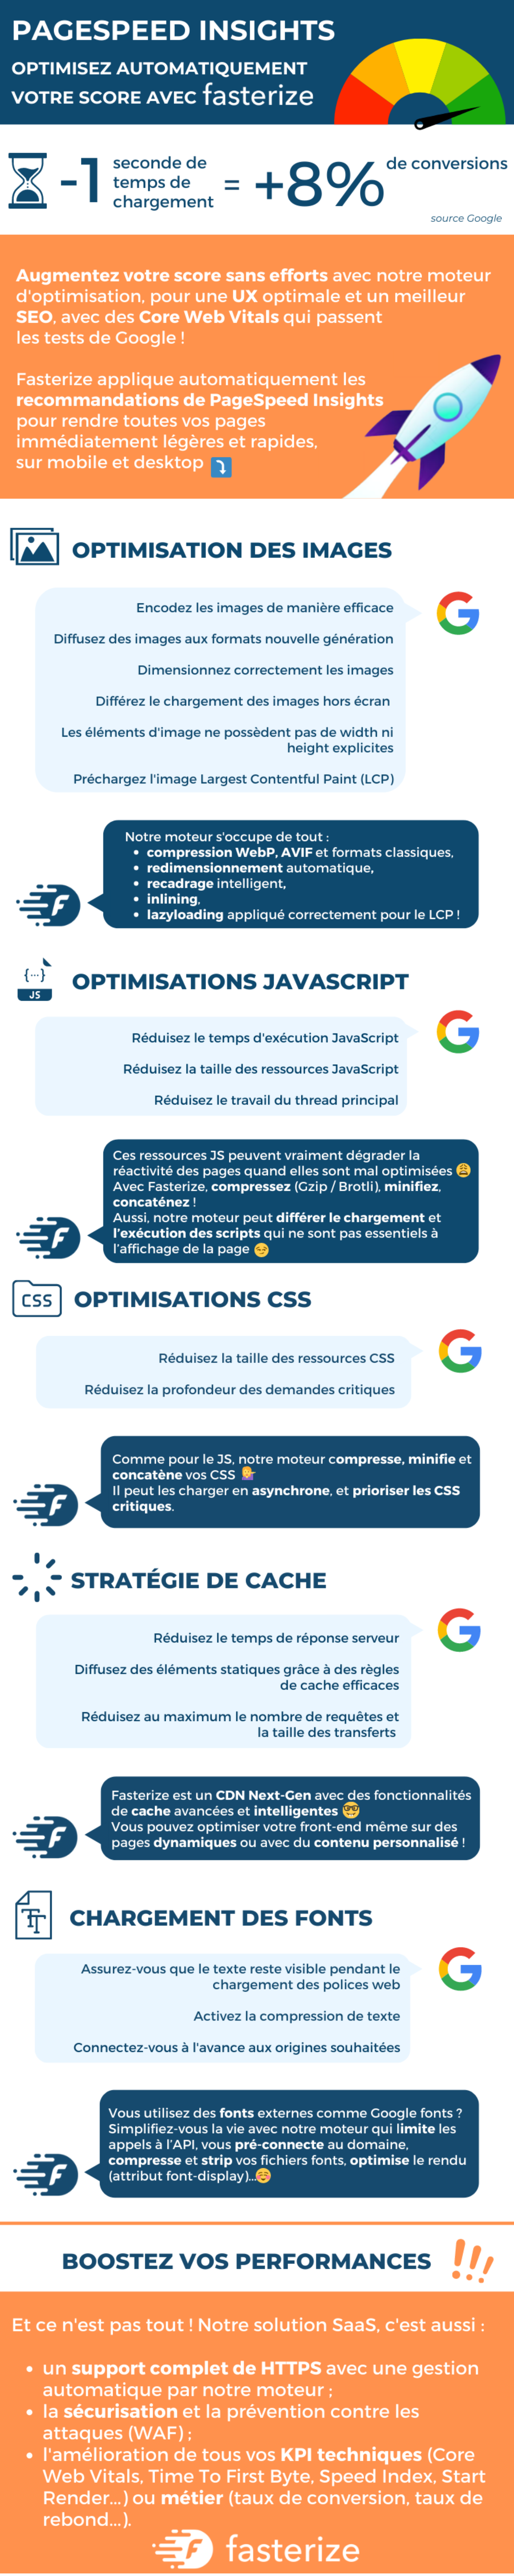 infographie : Fasterize applique les recommandations de PageSpeed Insights